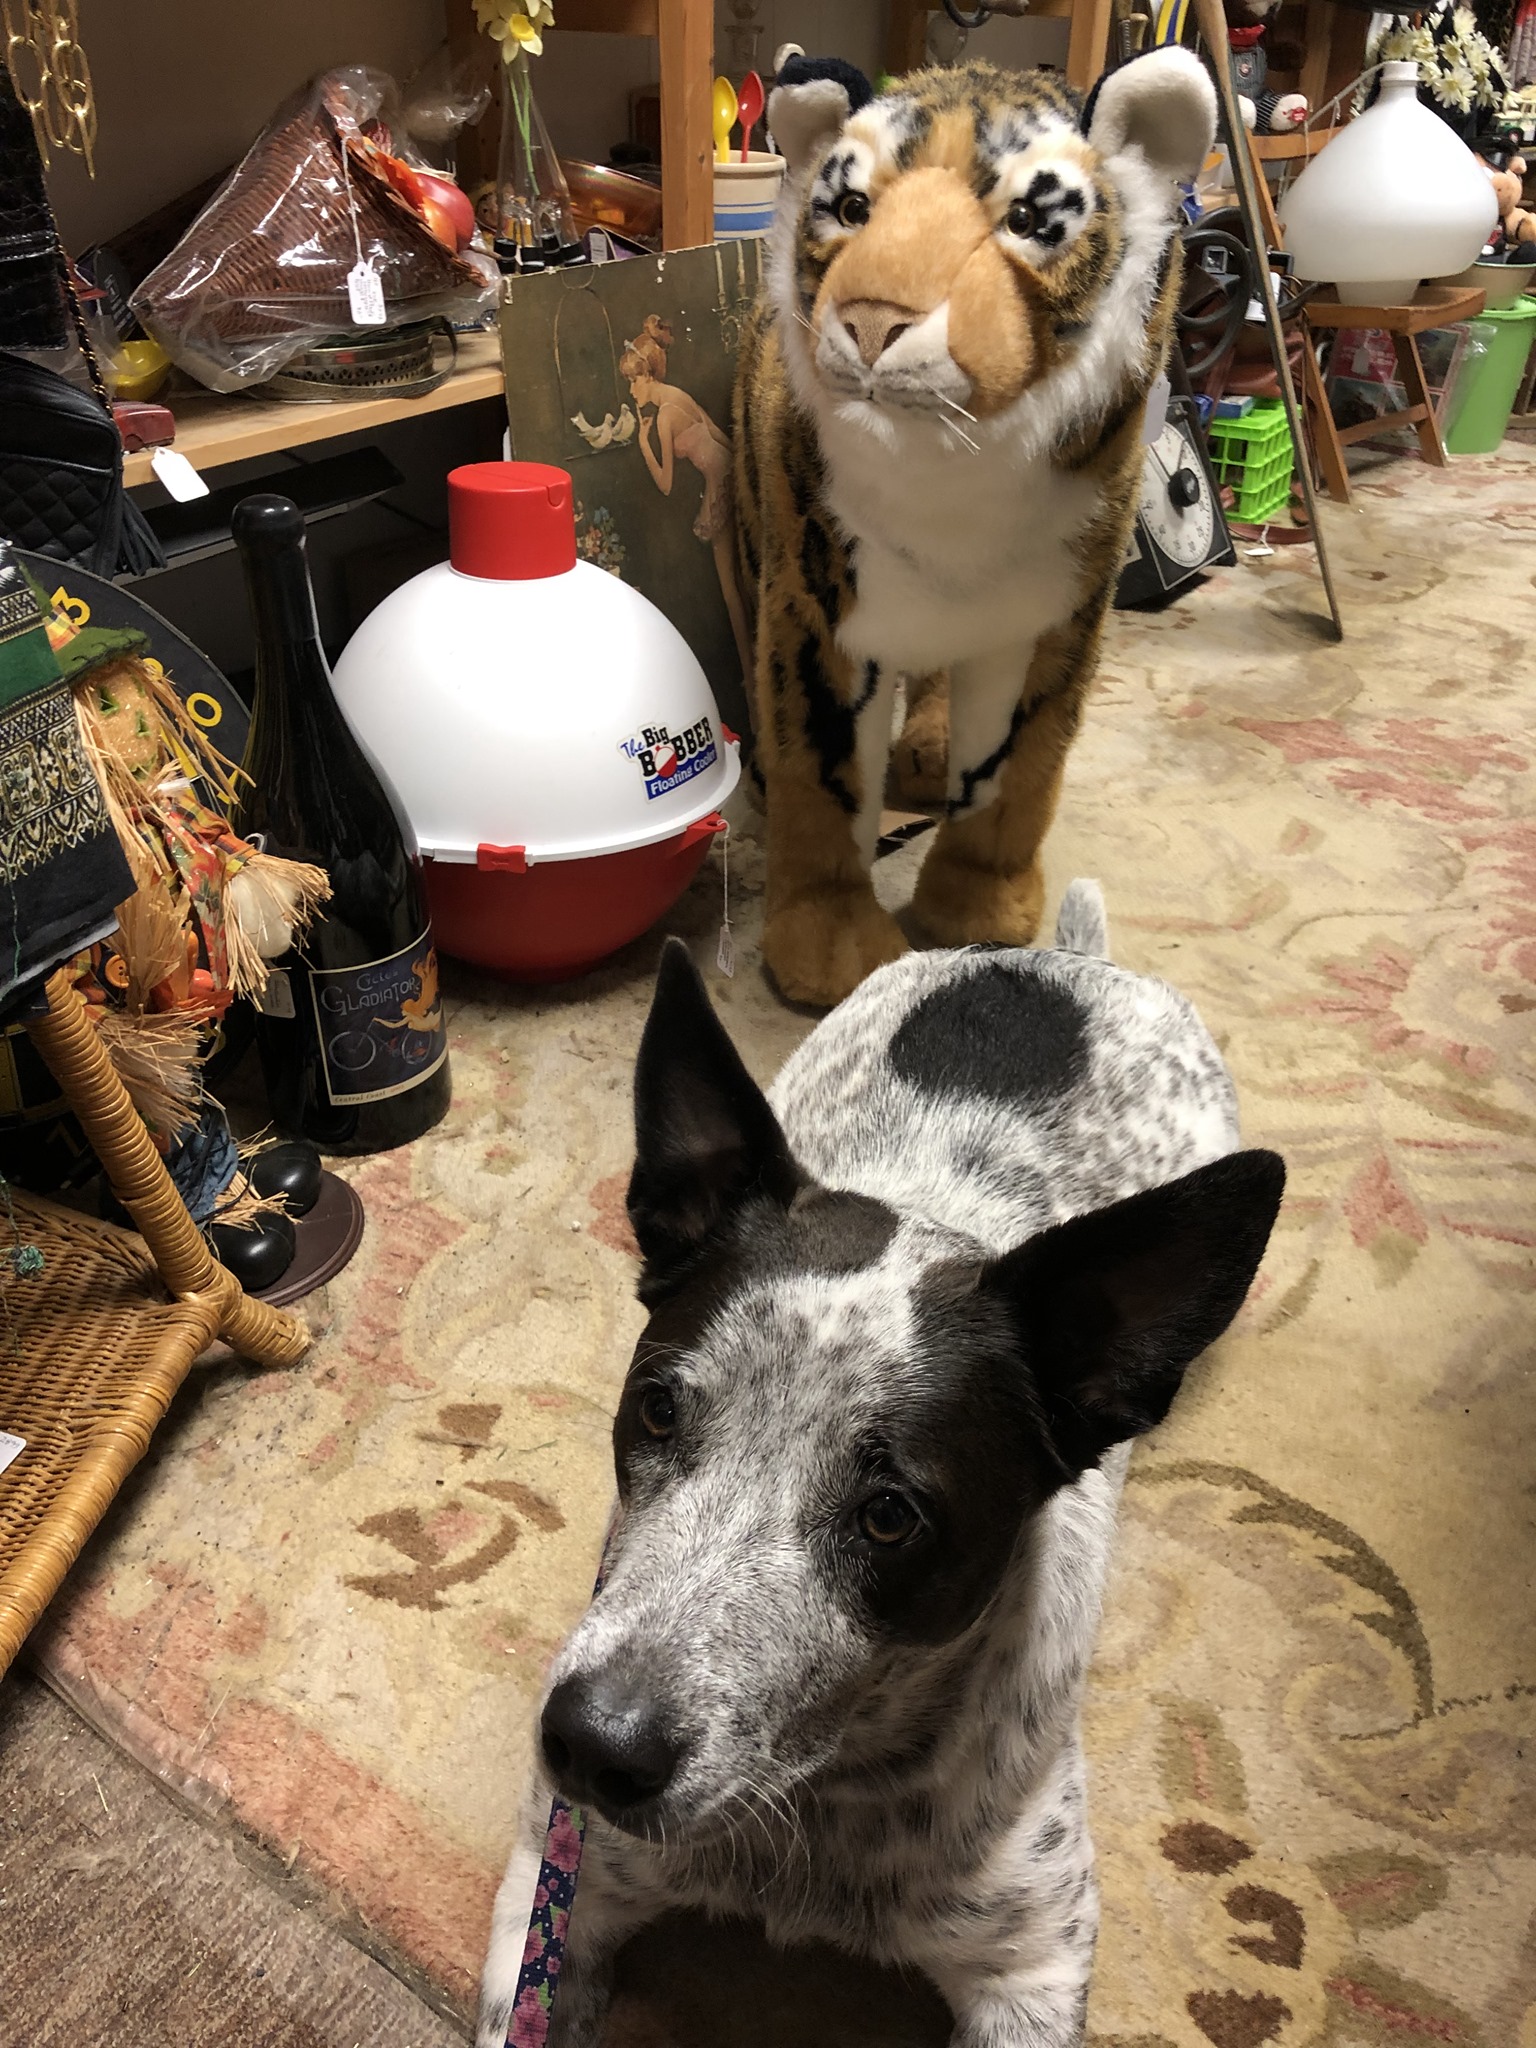 Scranberry Coop Snapshots - Tosh says "whoa, look at all these BALLS!" - Scranberry Coop - Vintage Store - Antiques, Collectibles, & More